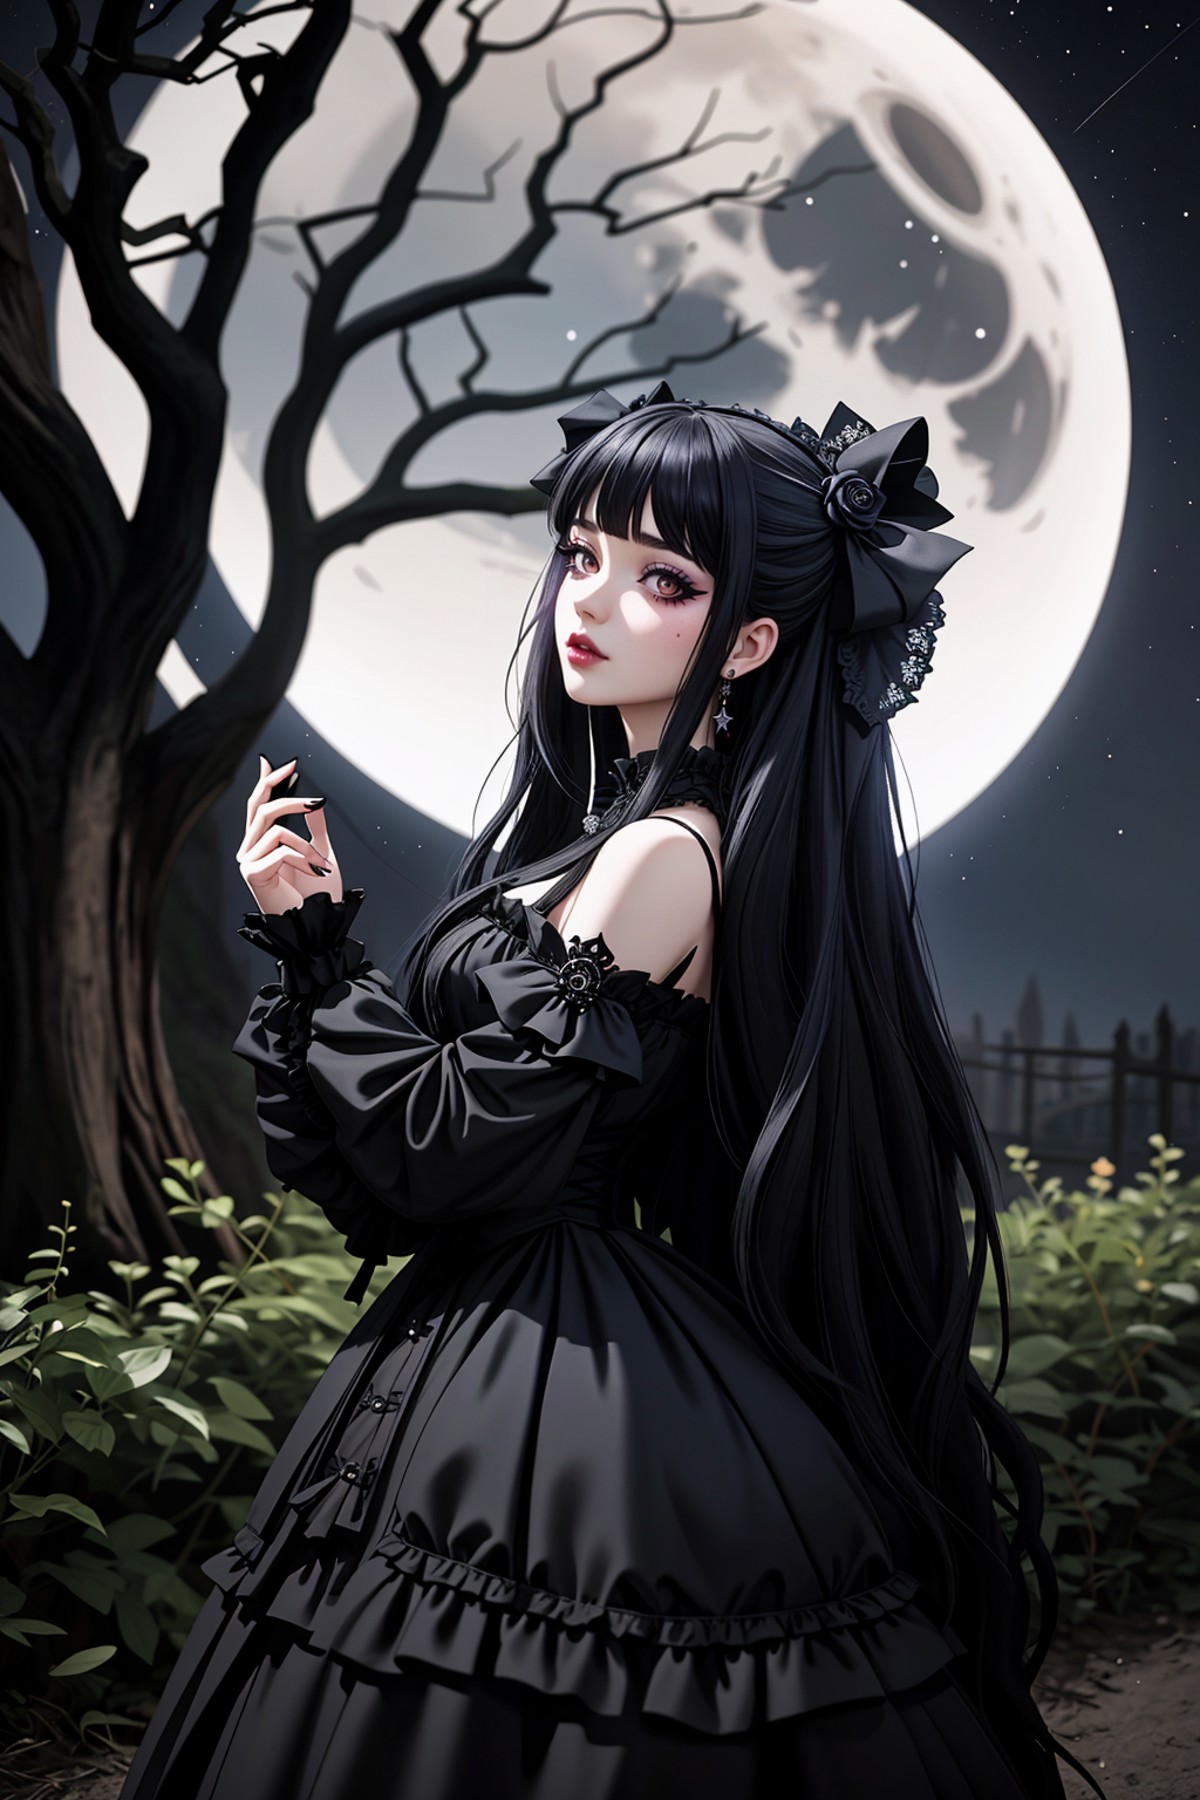 ((Masterpiece, best quality)), edgQuality,
GothGal, a woman with long hair and a dress posing for a picture next to a tree...